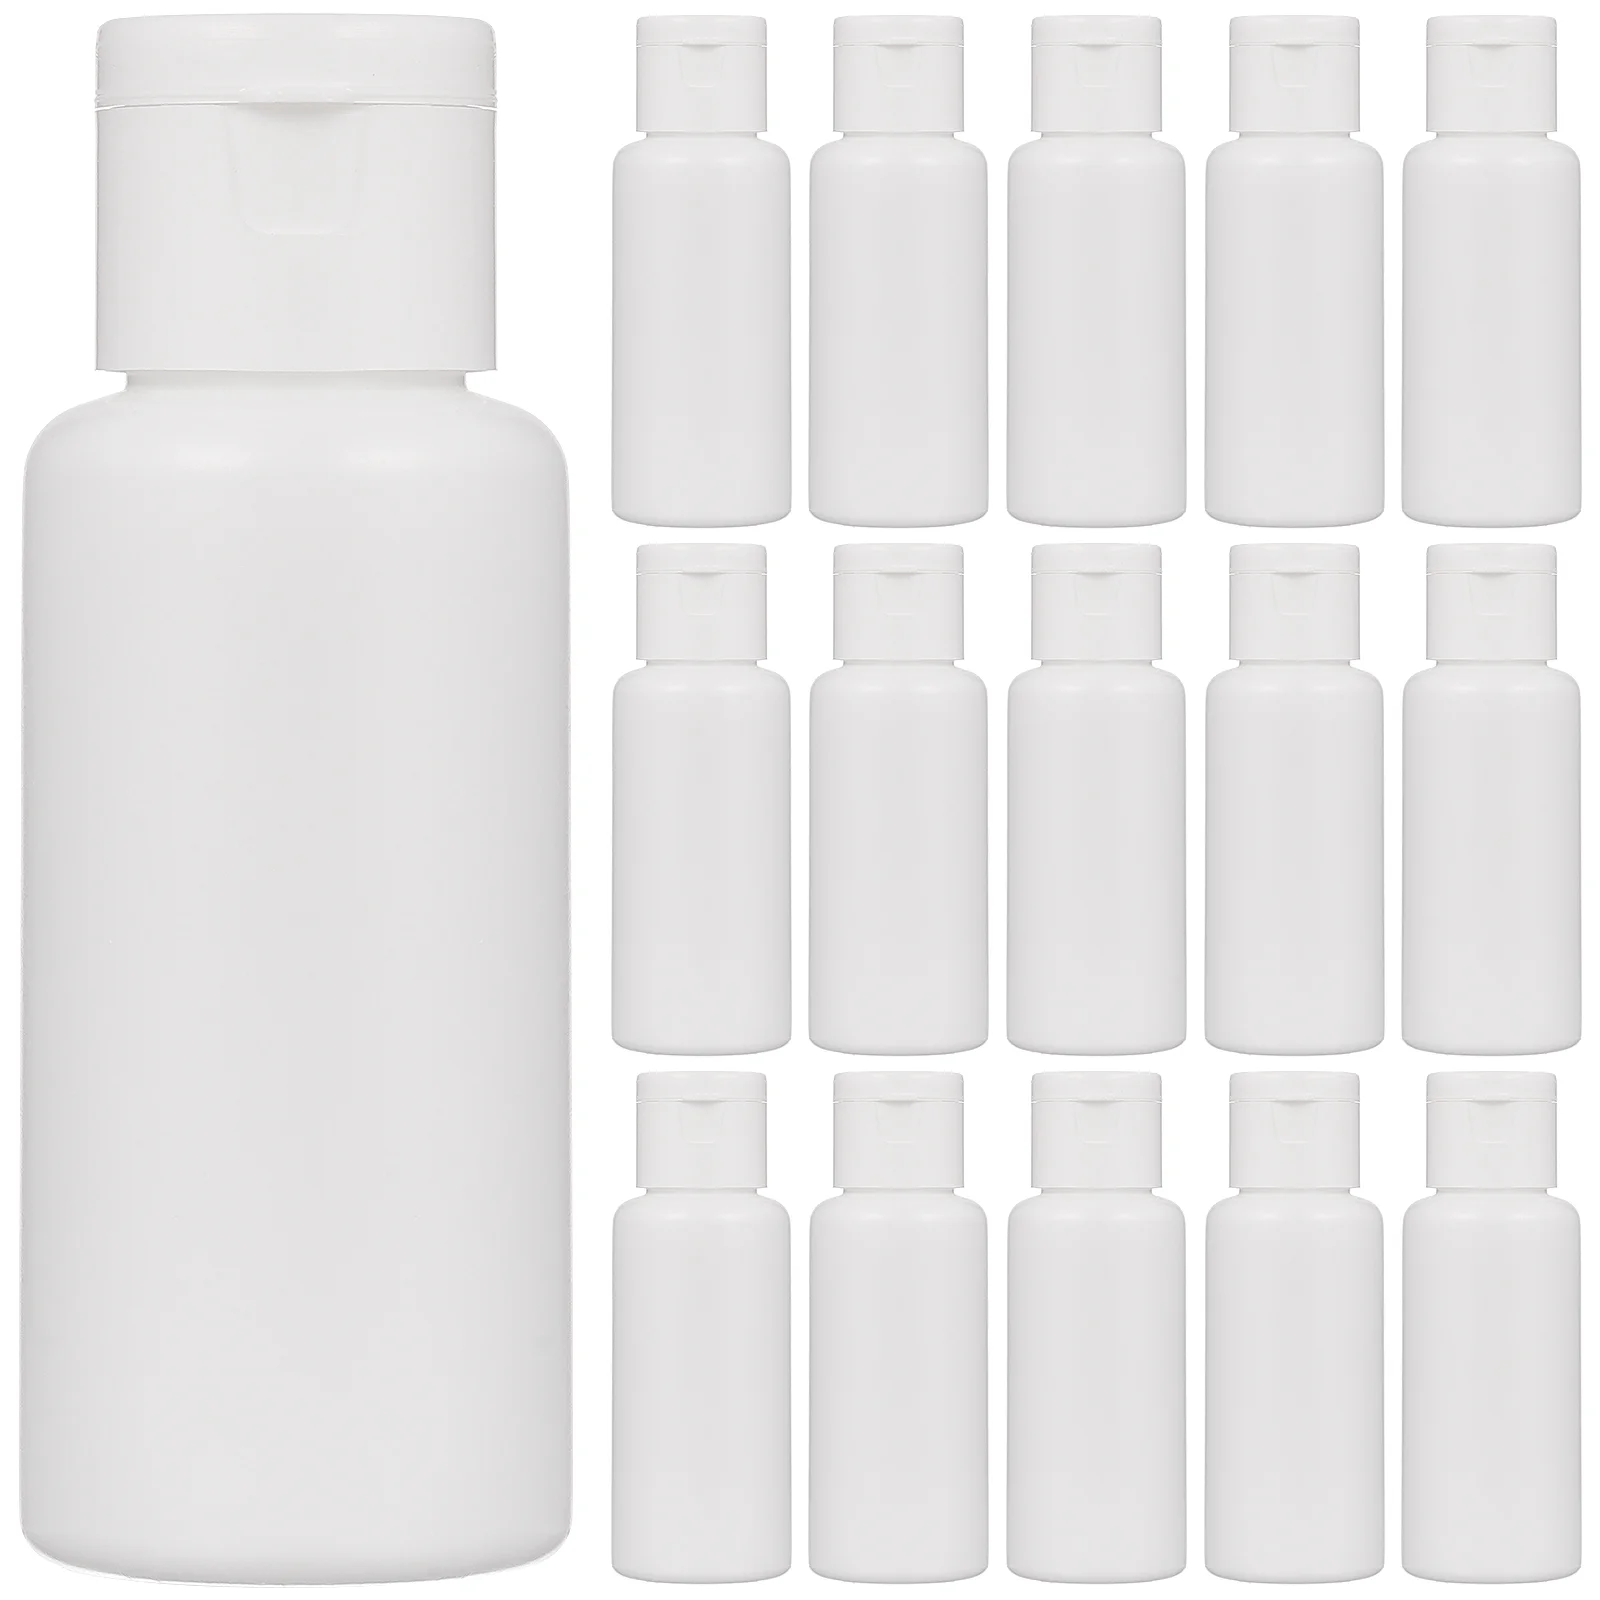 

30pcs 30ml Travel Bottles Leak Proof Refillable Toiletry Containers Lotion Dispenser Squeeze Bottle for Shampoo and Lotion Jars